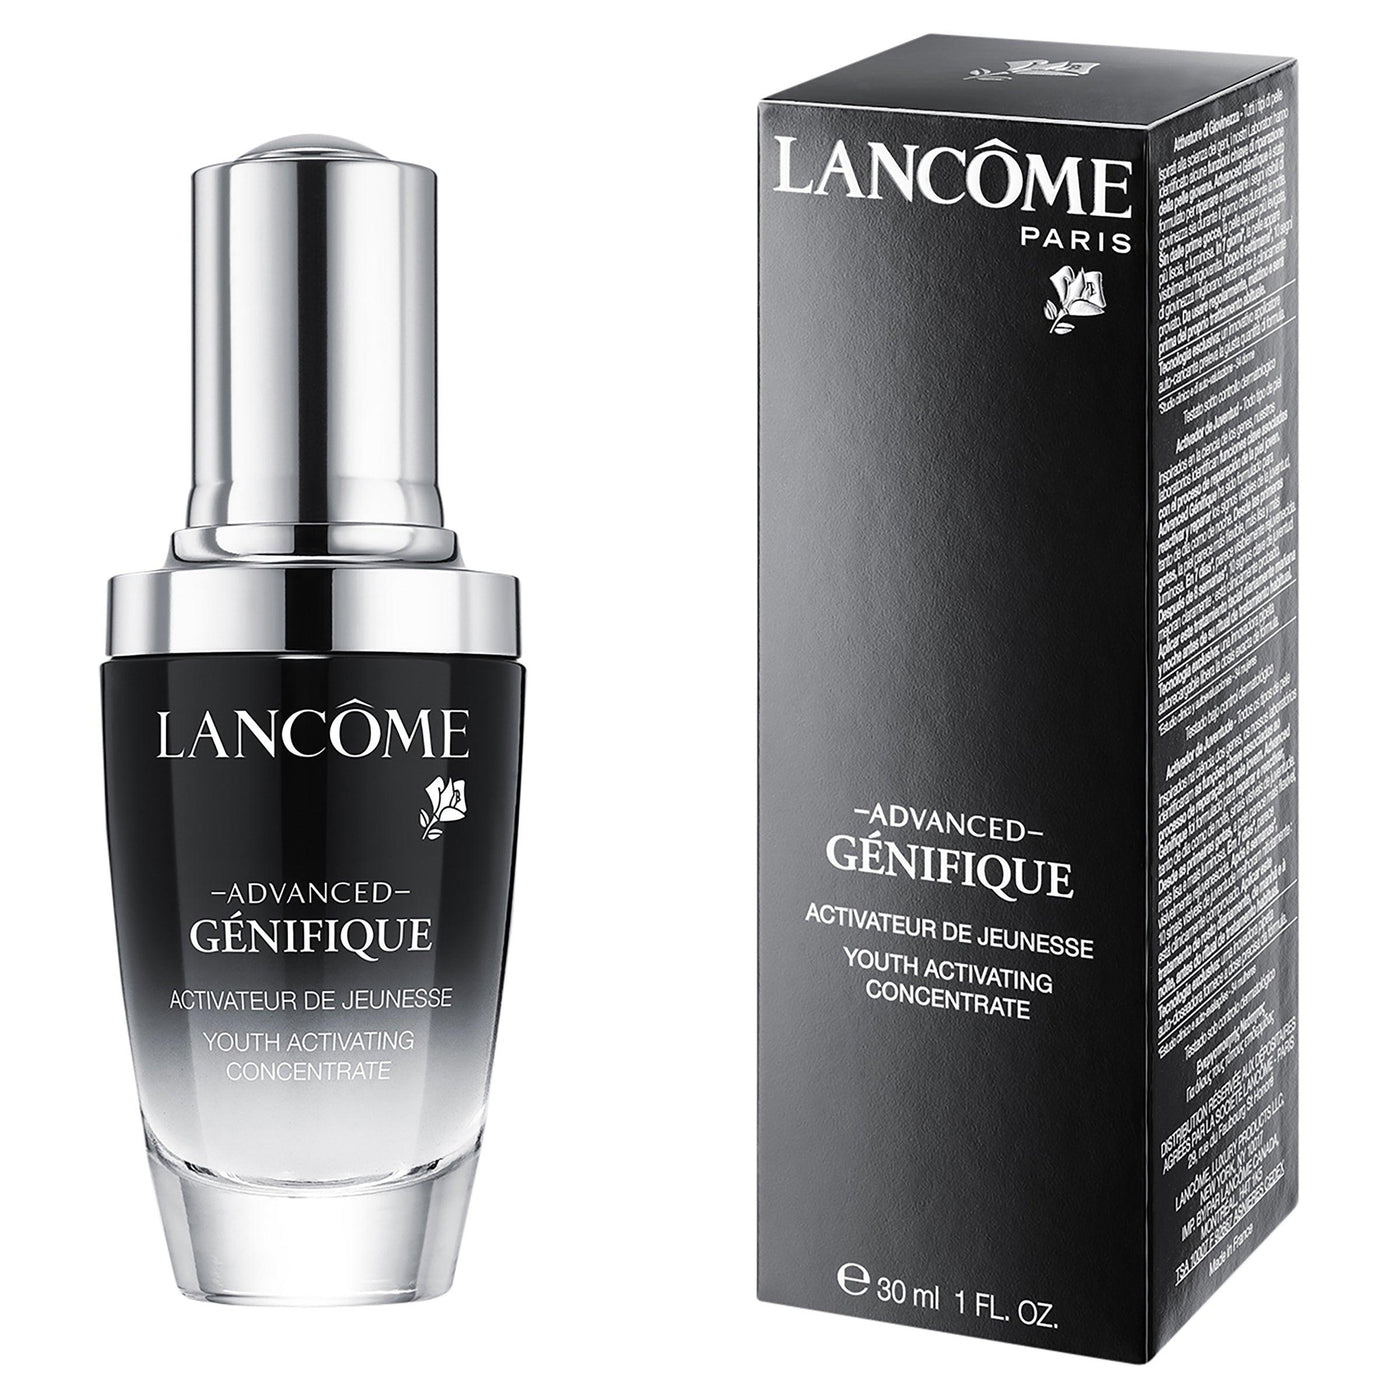 Lancome - Advanced Genifique Youth Activating Concentrate Serum - Ascent Luxury Cosmetics